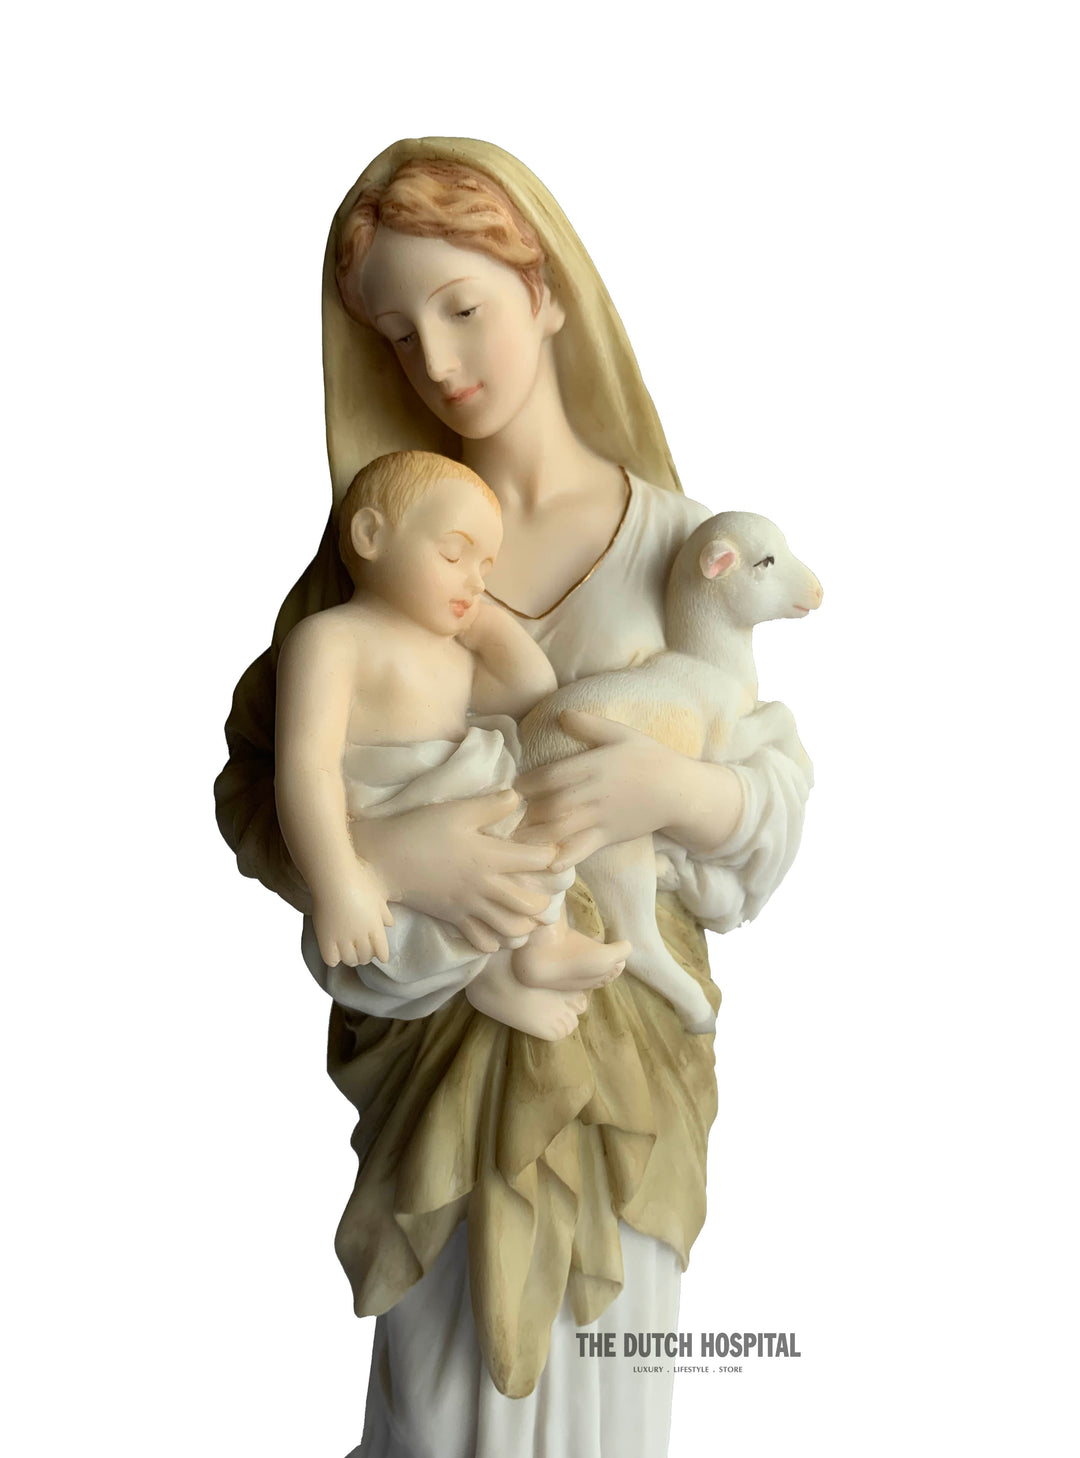 Innocence – Mother Mary Holding baby Jesus and Lamb  –  Statue of female